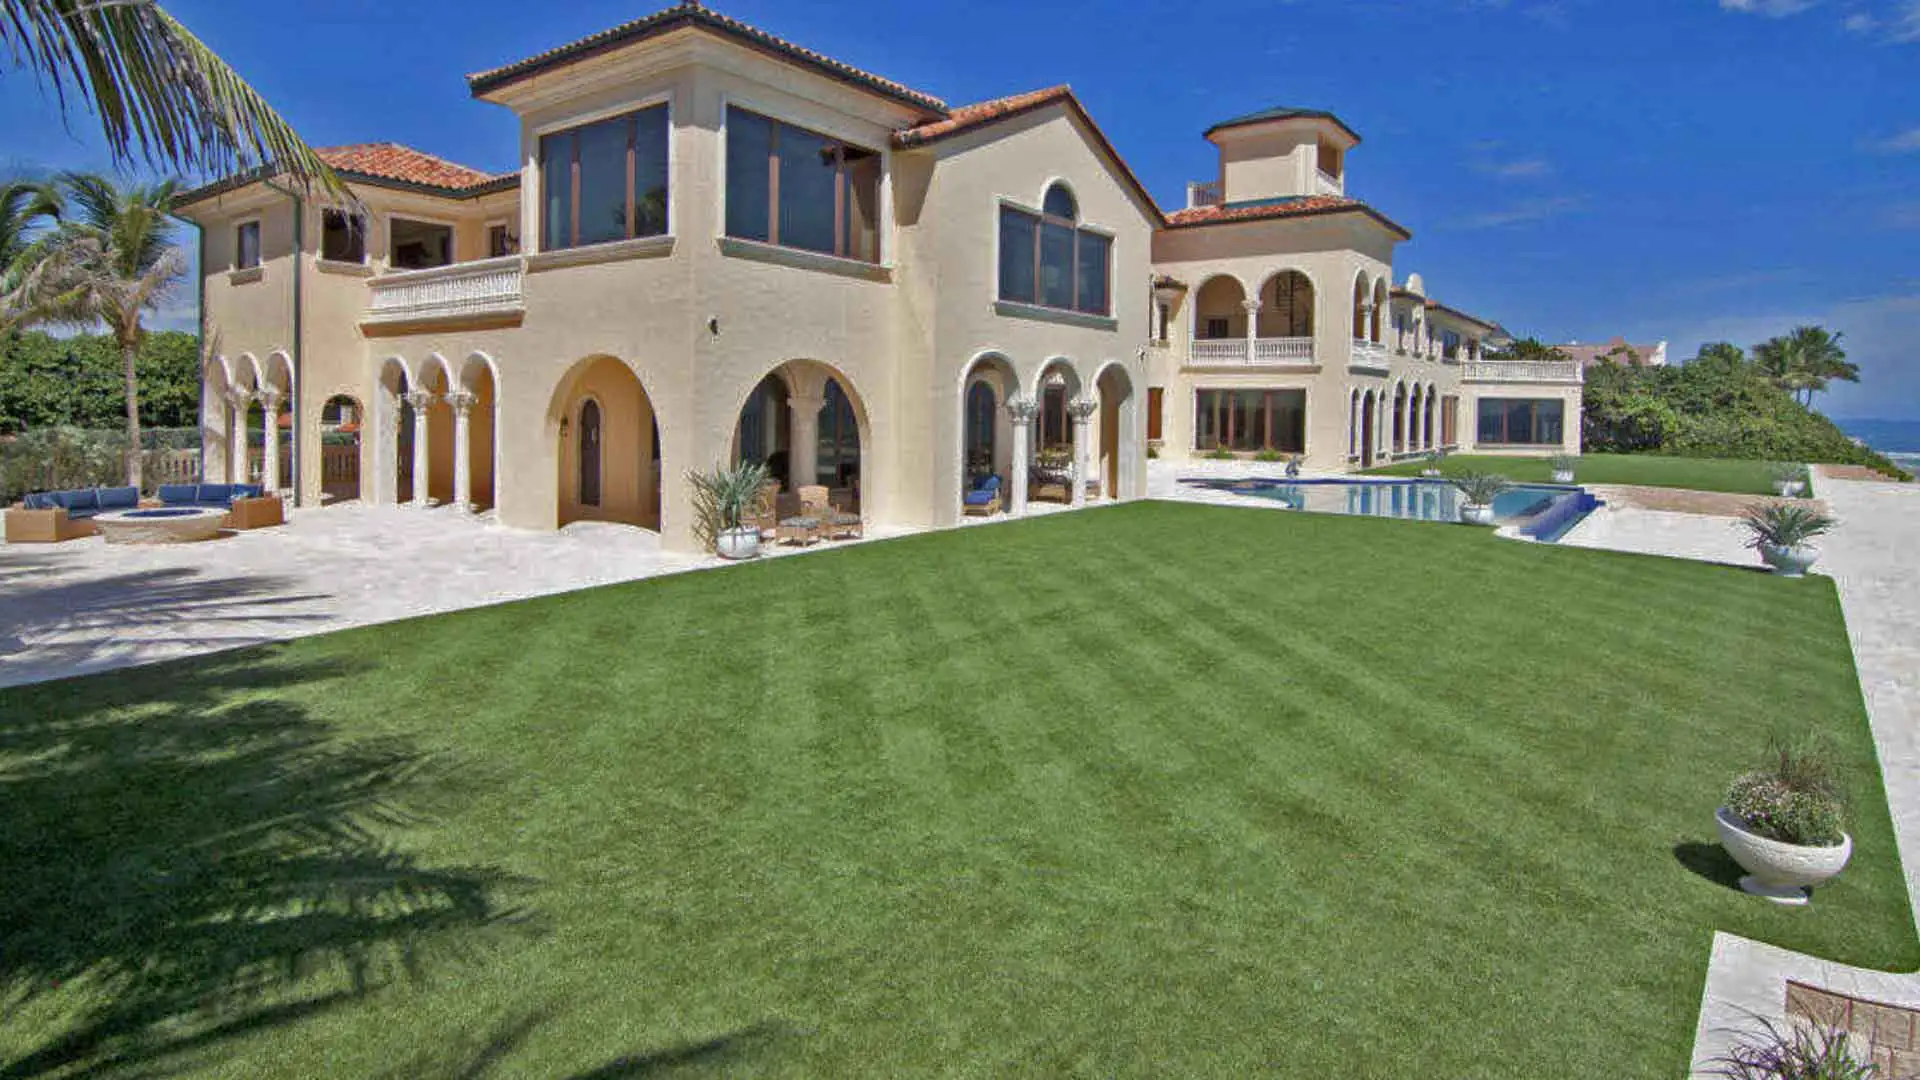 Large estate in Palm Beach, FL with landscape maintenance by Greenscape Design.